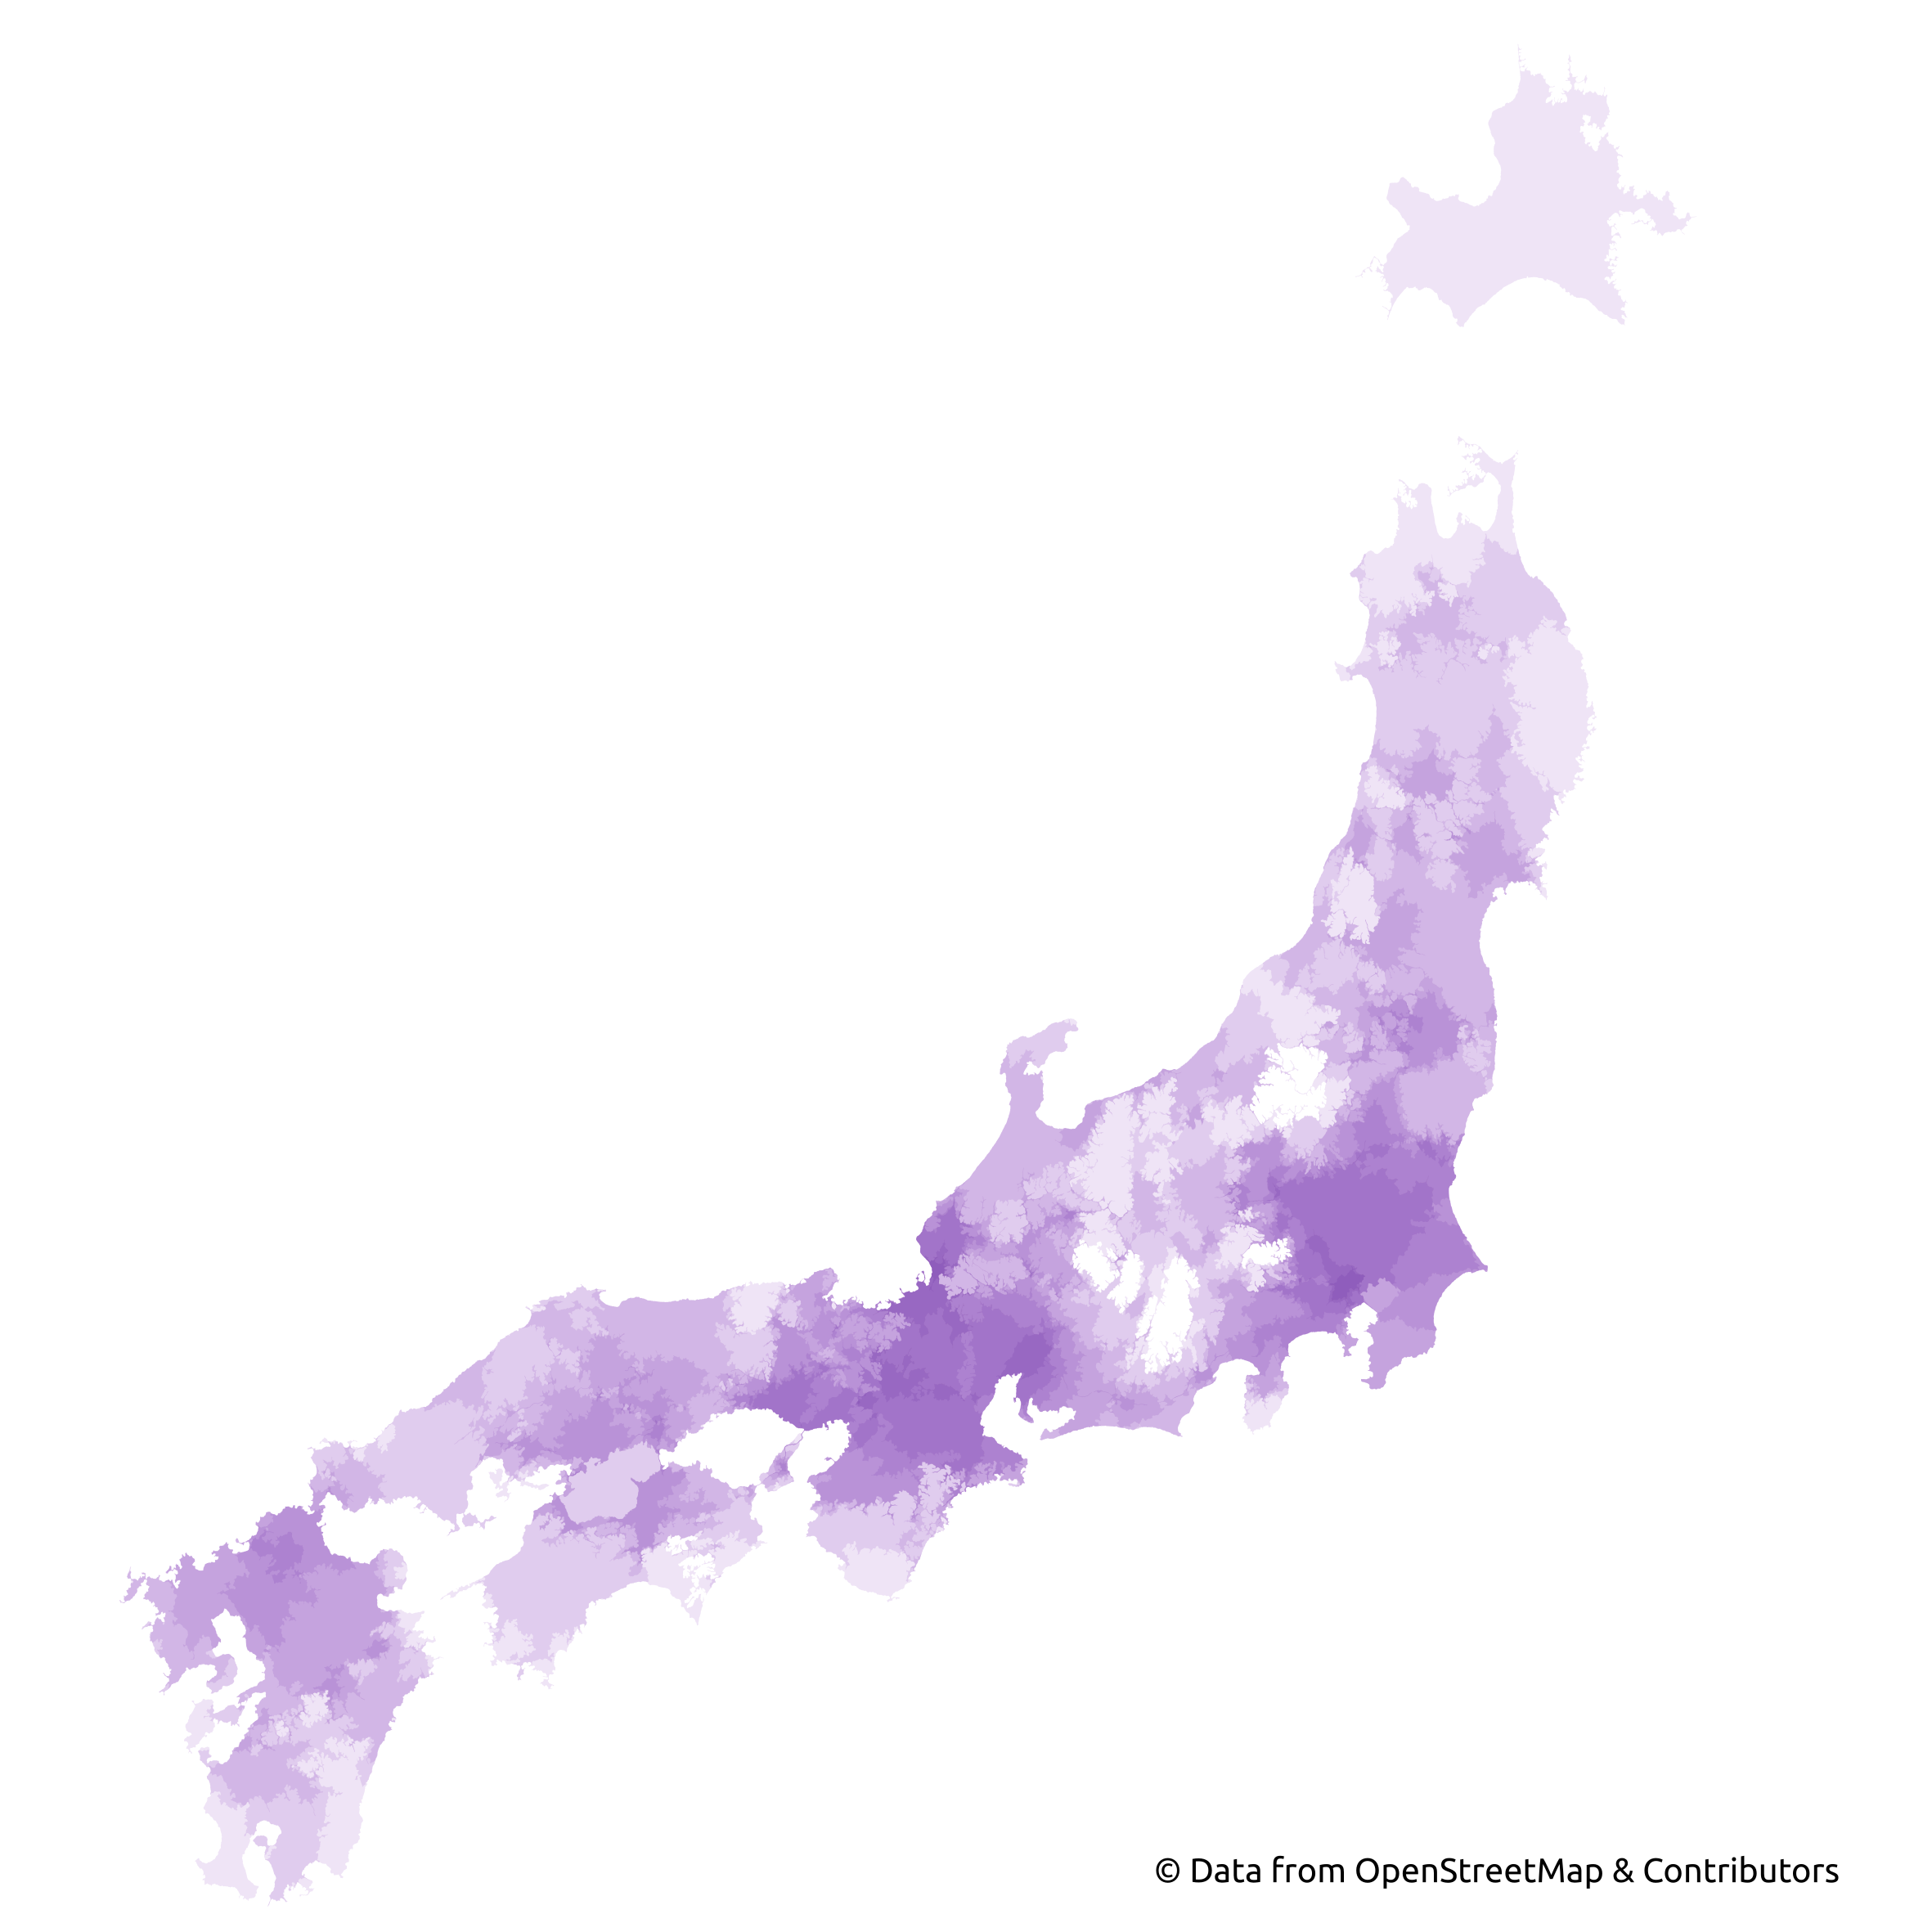 Isochrones (areas reachable within 2 hours from larger Japanese cities) by HeiGIT’s openrouteservice for bigger cities on the main islands of Japan, Marcel Reinmuth’s submission for Day 3 (“Polygons”) of Topi Tjukanov’s Twitter event #30DayMapChallenge. Map derived from OpenStreetMap data.